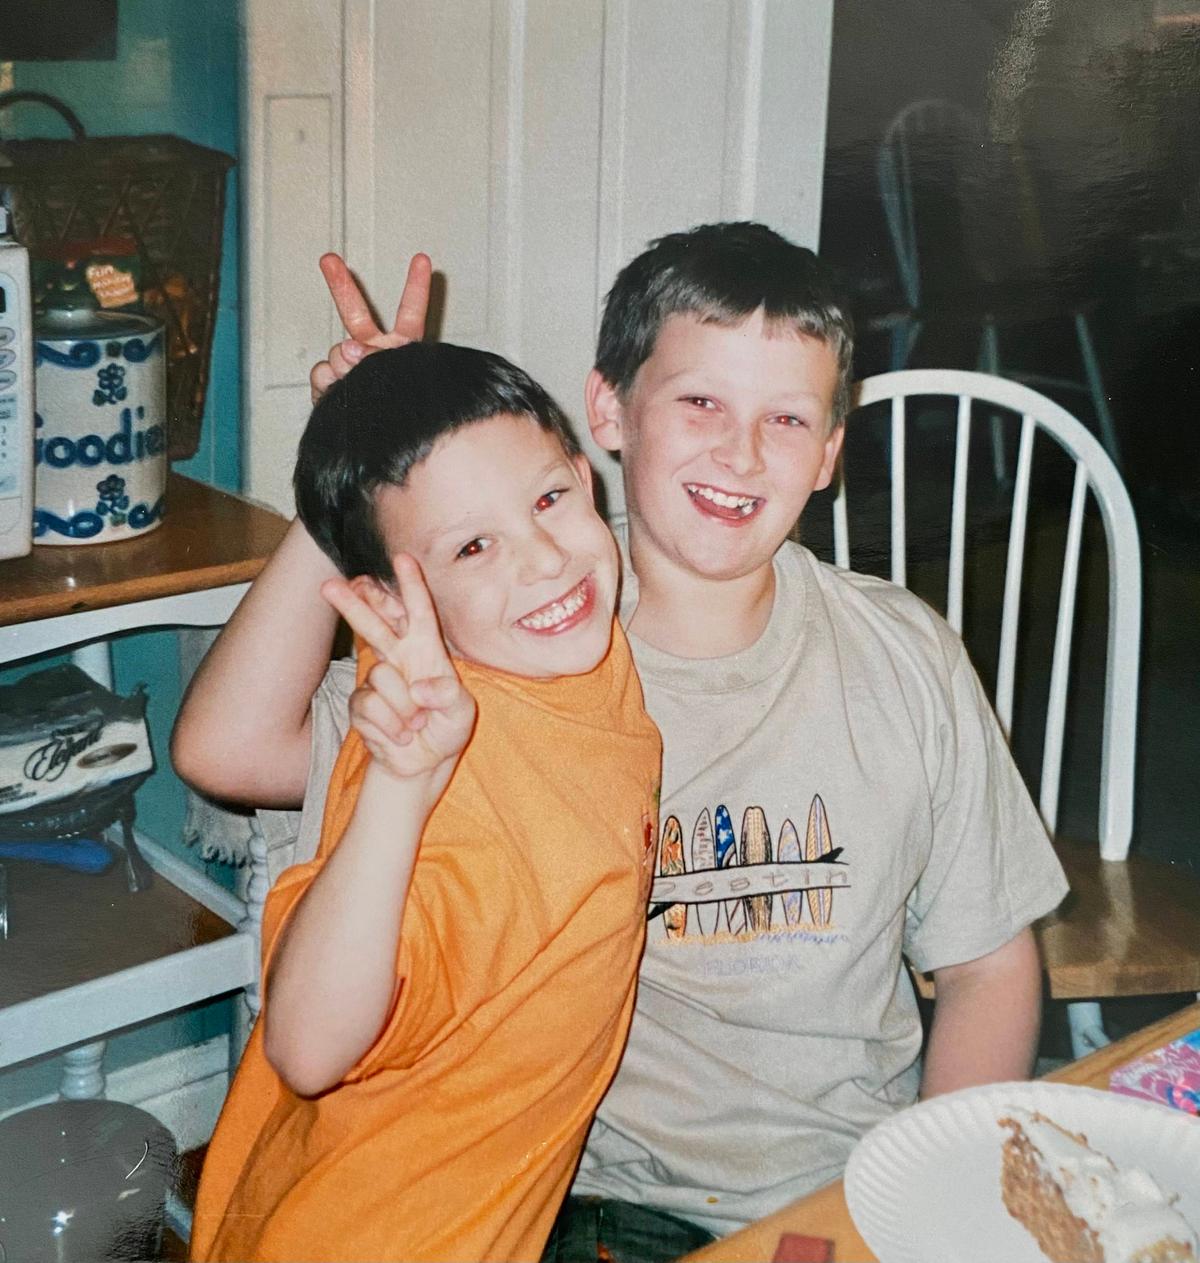 Griffin, at 5 years old, with his brother. (Courtesy ofGriffin Furlong)